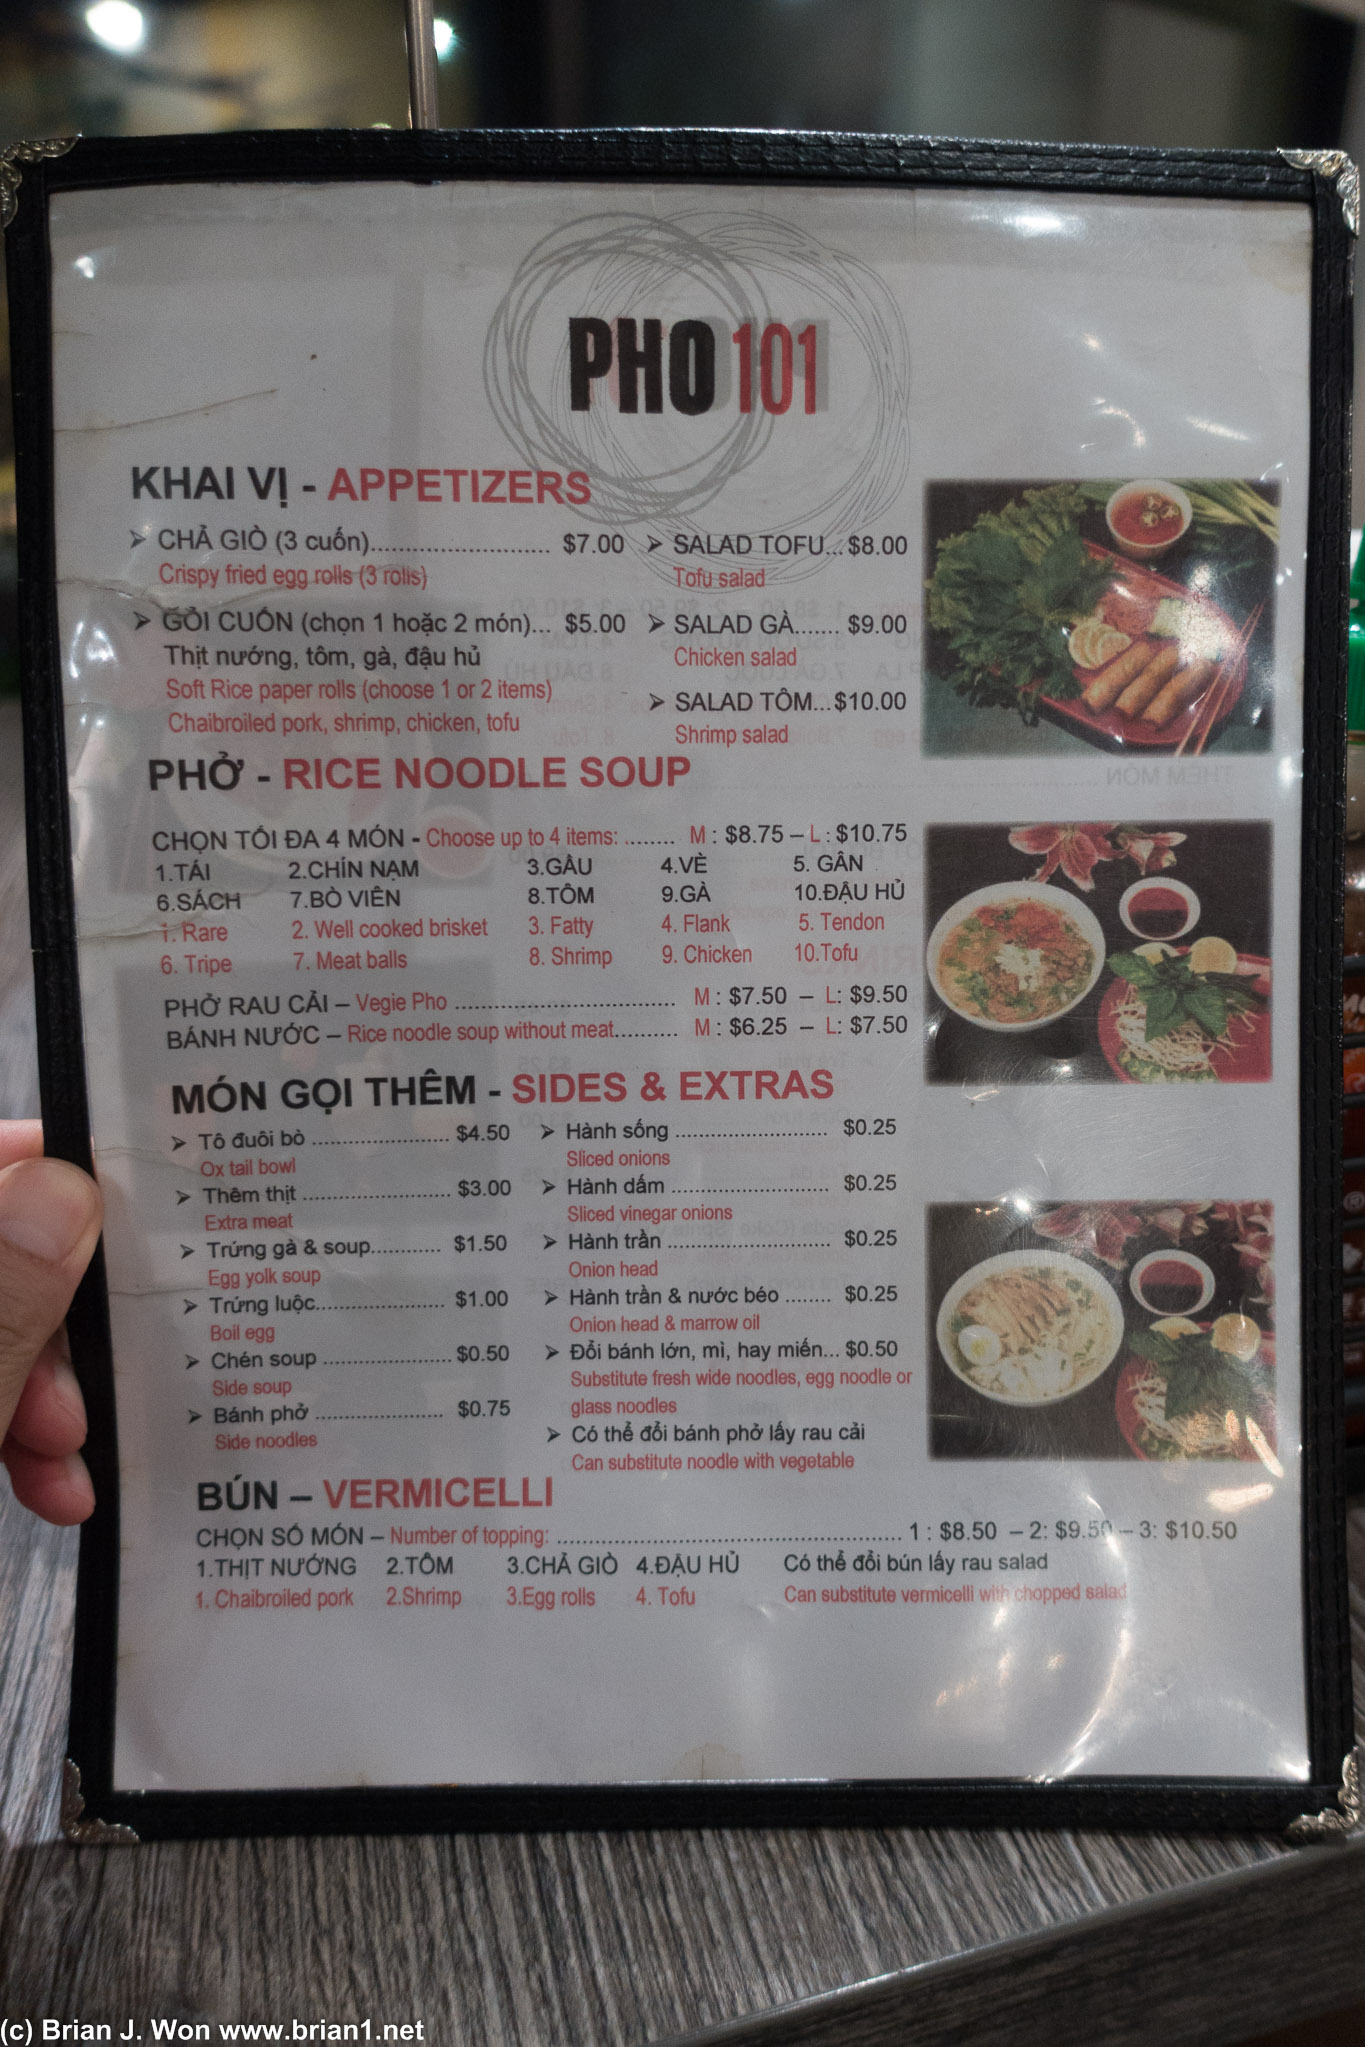 The menu at Pho 101. If you're early enough, veggie pho + add ox tail...